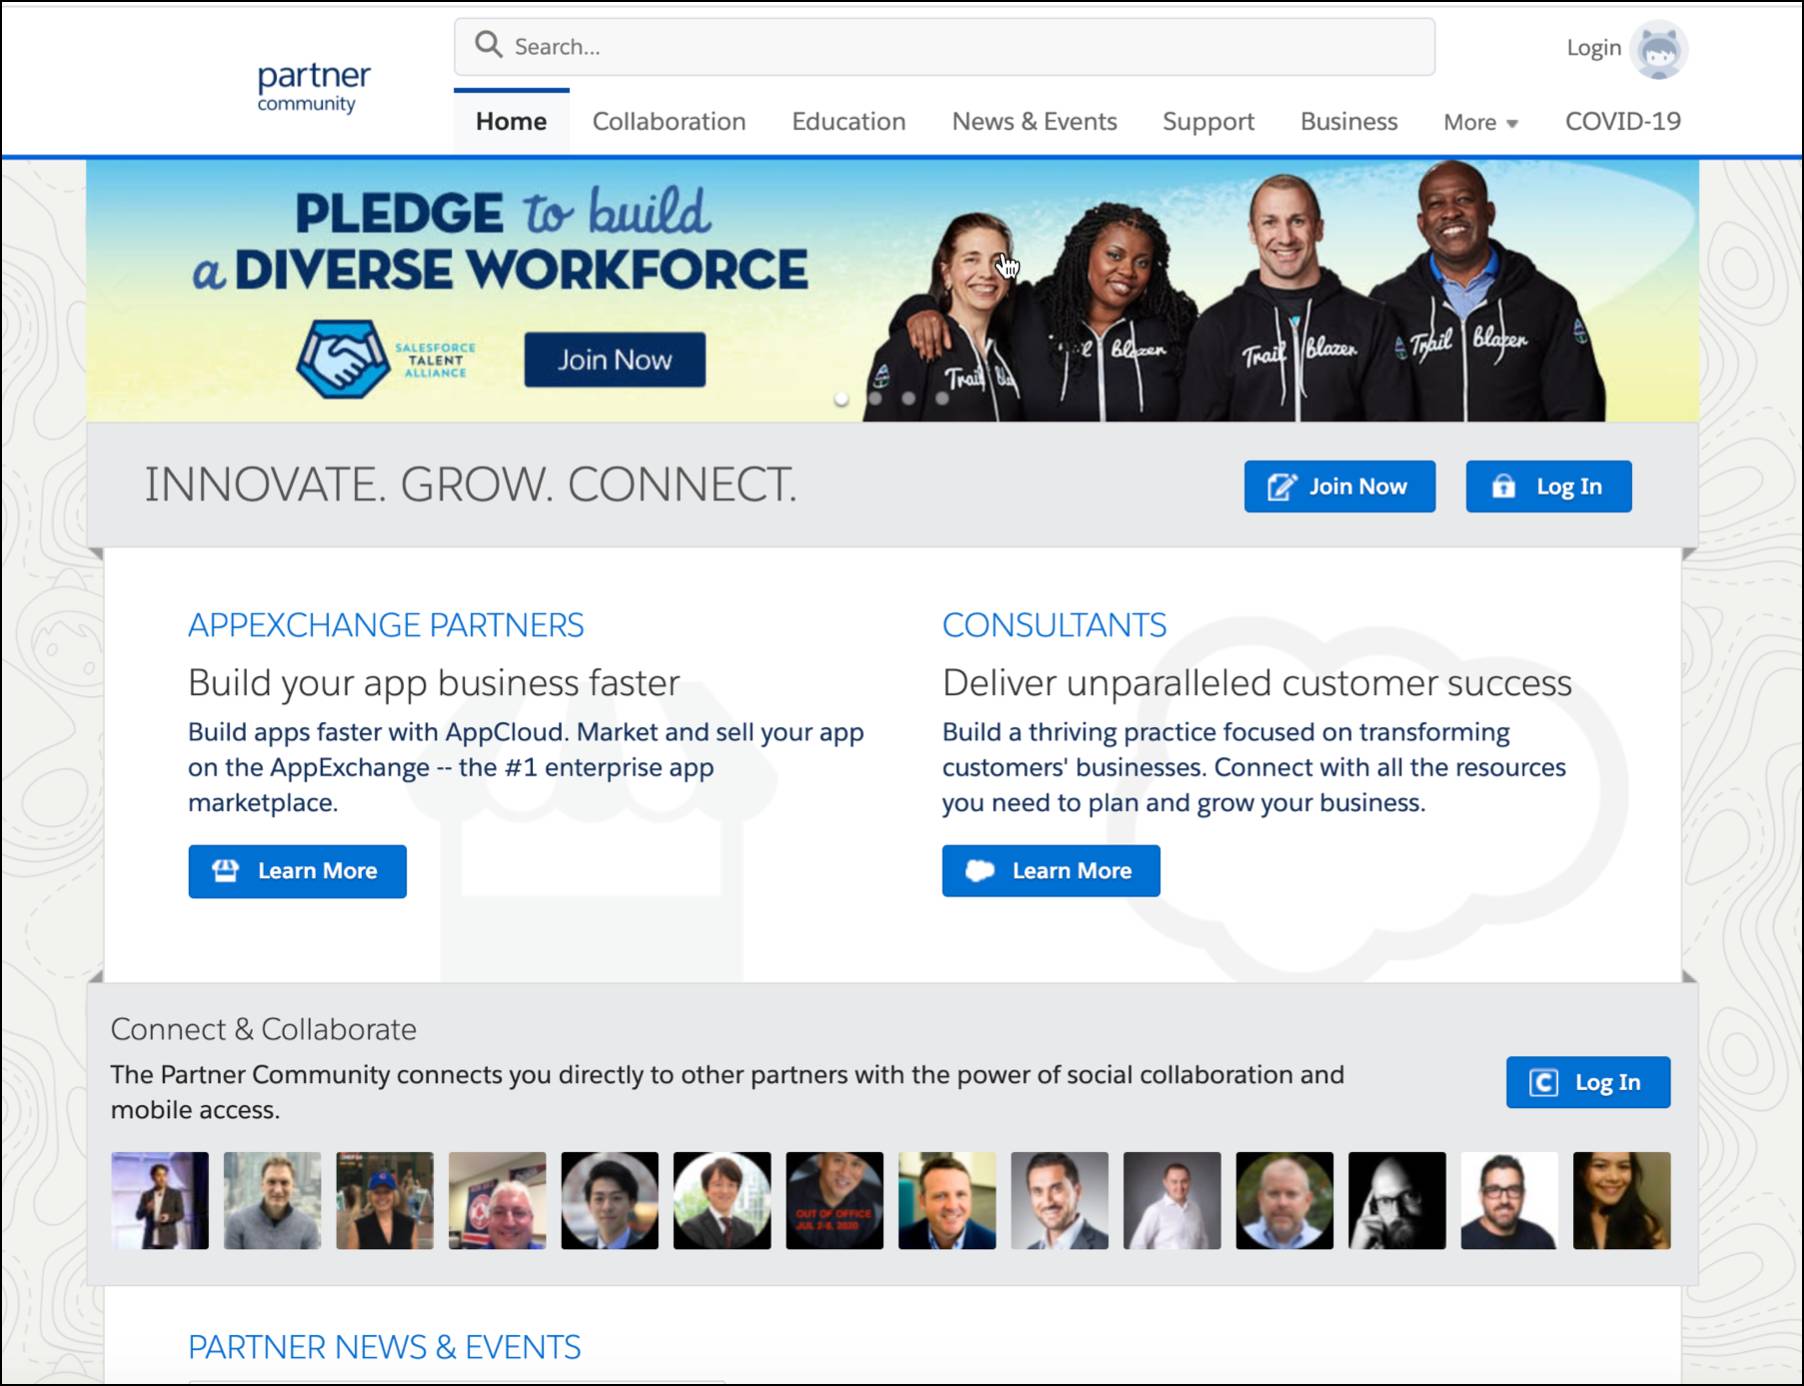 Join the Salesforce Partner Community to get answers, share ideas, and learn best practices.